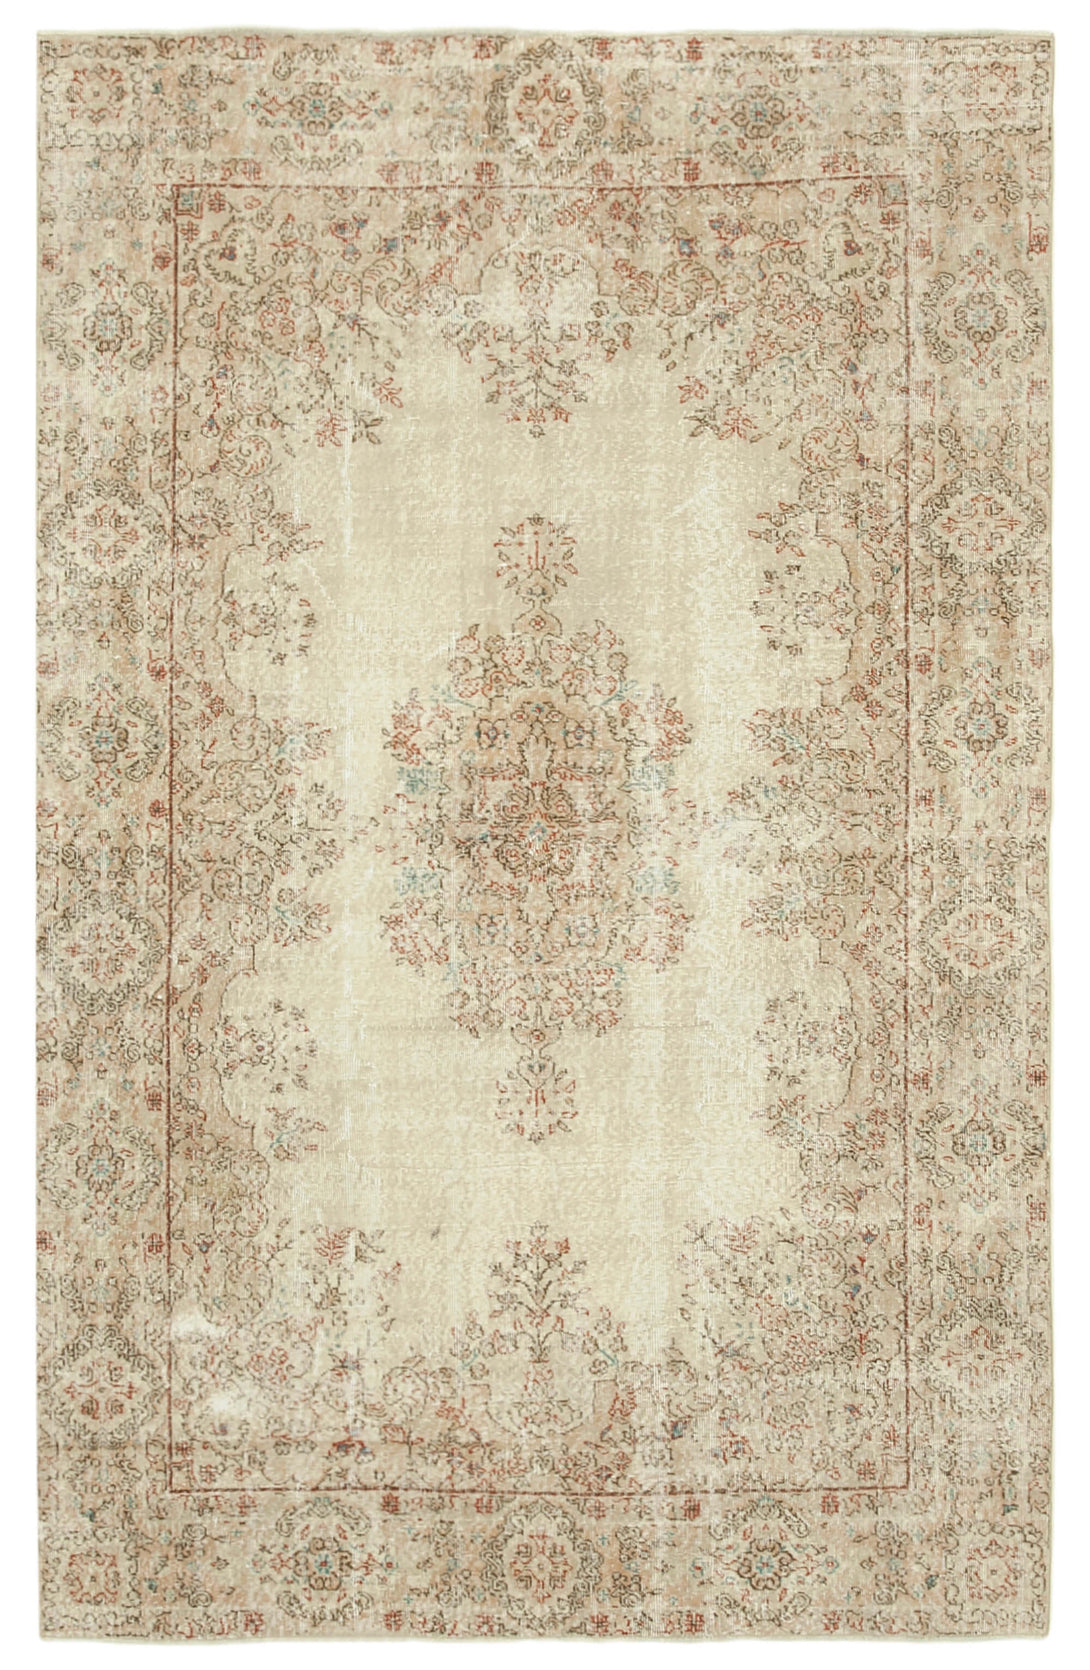 Handmade White Wash Area Rug > Design# OL-AC-39062 > Size: 6'-2" x 9'-7", Carpet Culture Rugs, Handmade Rugs, NYC Rugs, New Rugs, Shop Rugs, Rug Store, Outlet Rugs, SoHo Rugs, Rugs in USA